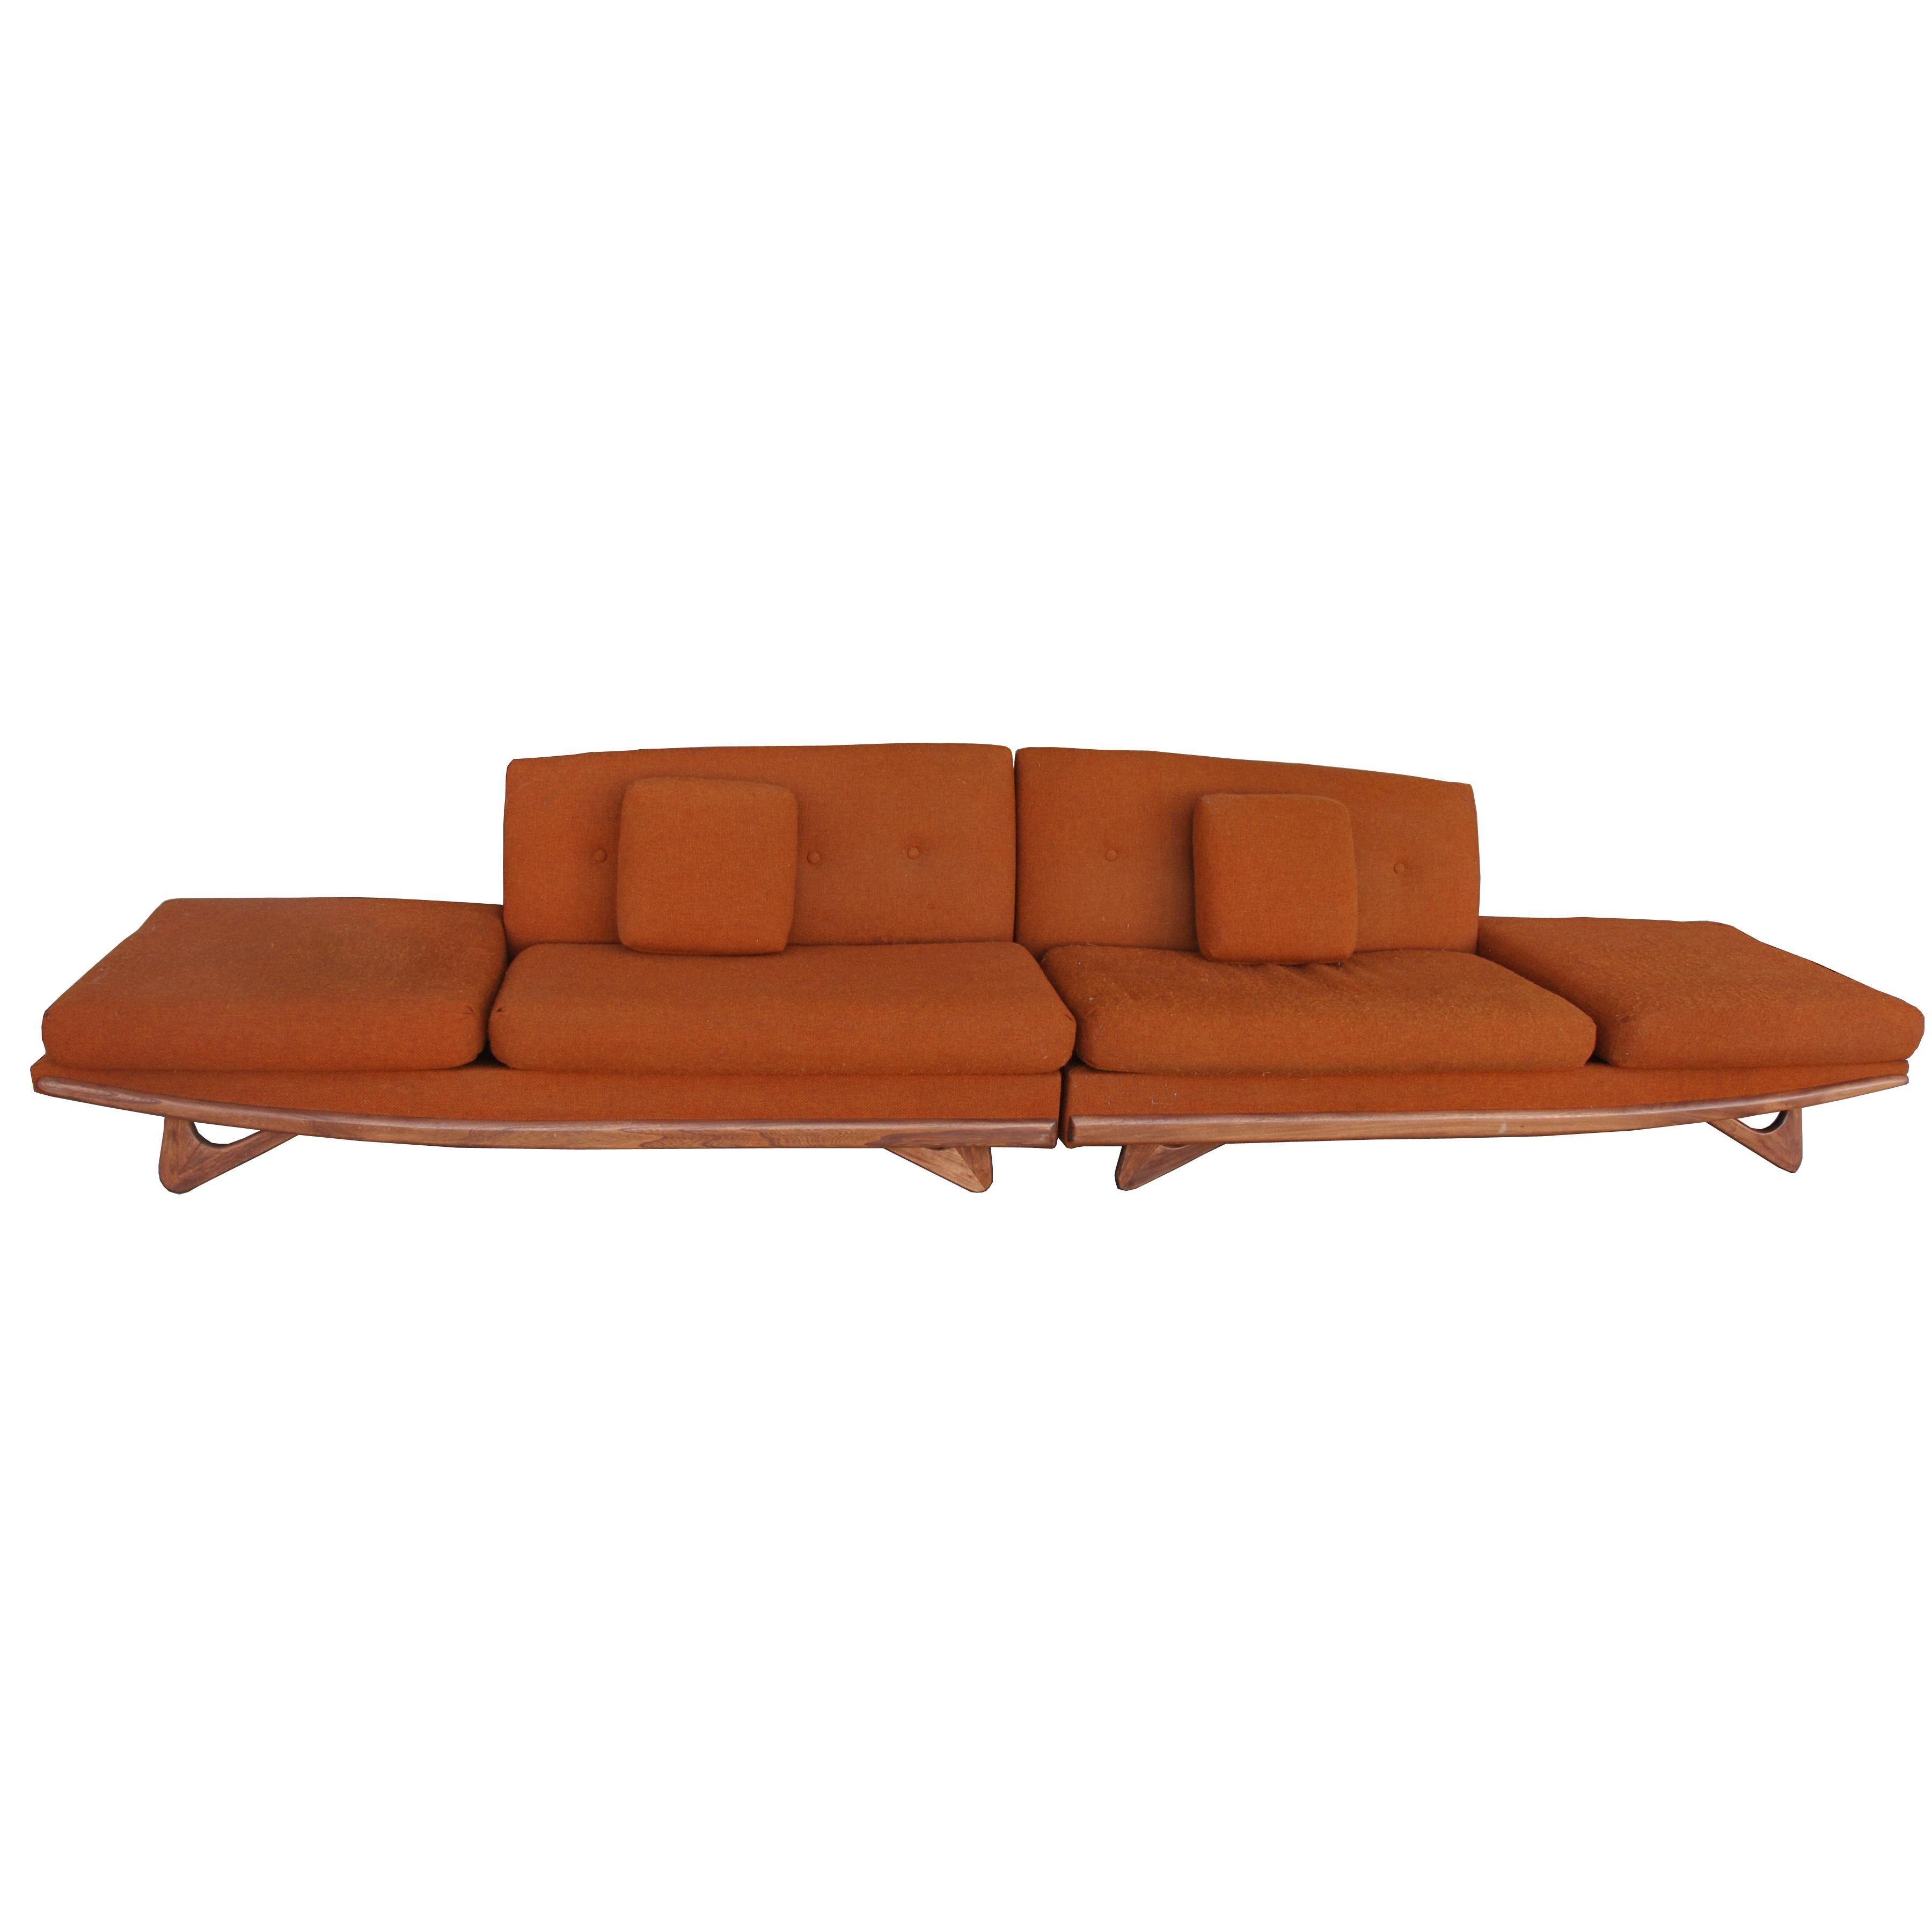 American Adrian Pearsall For Craft Associates Sectional Sofa  For Sale